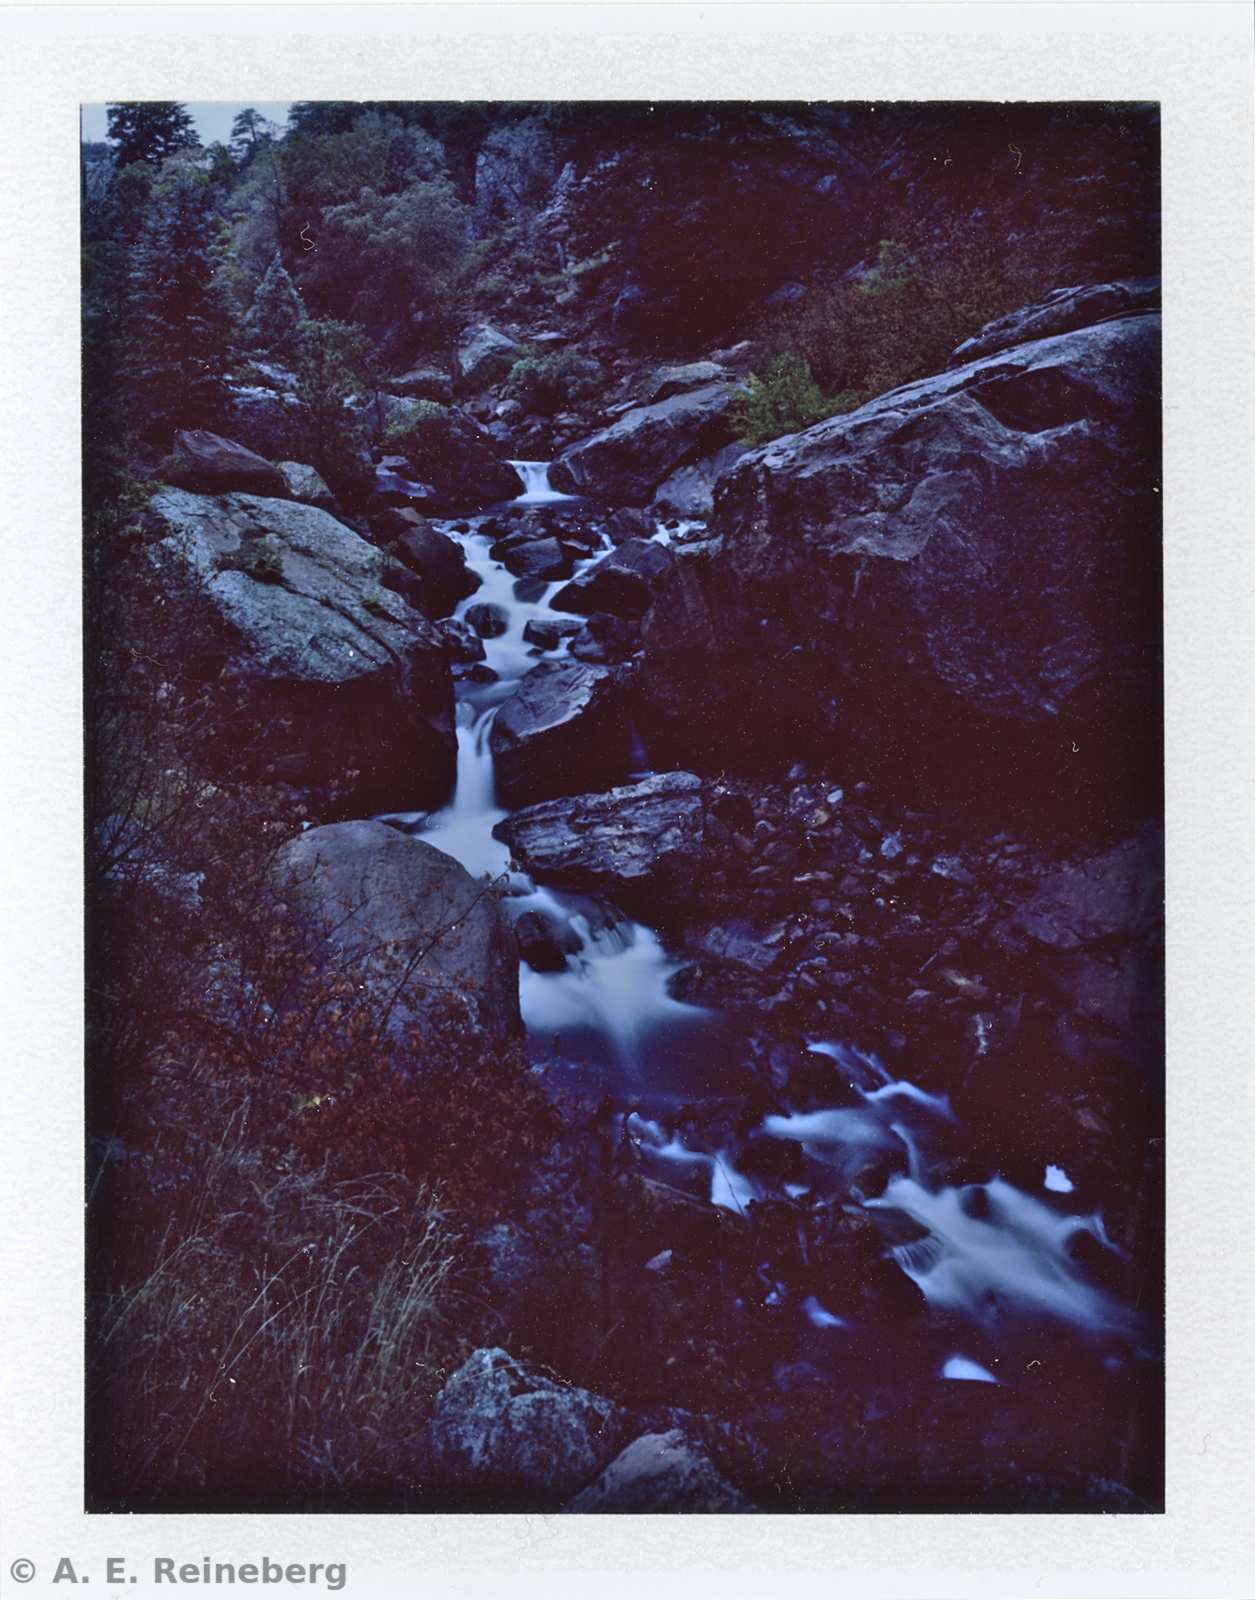 Polaroid project by Andrew Reineberg